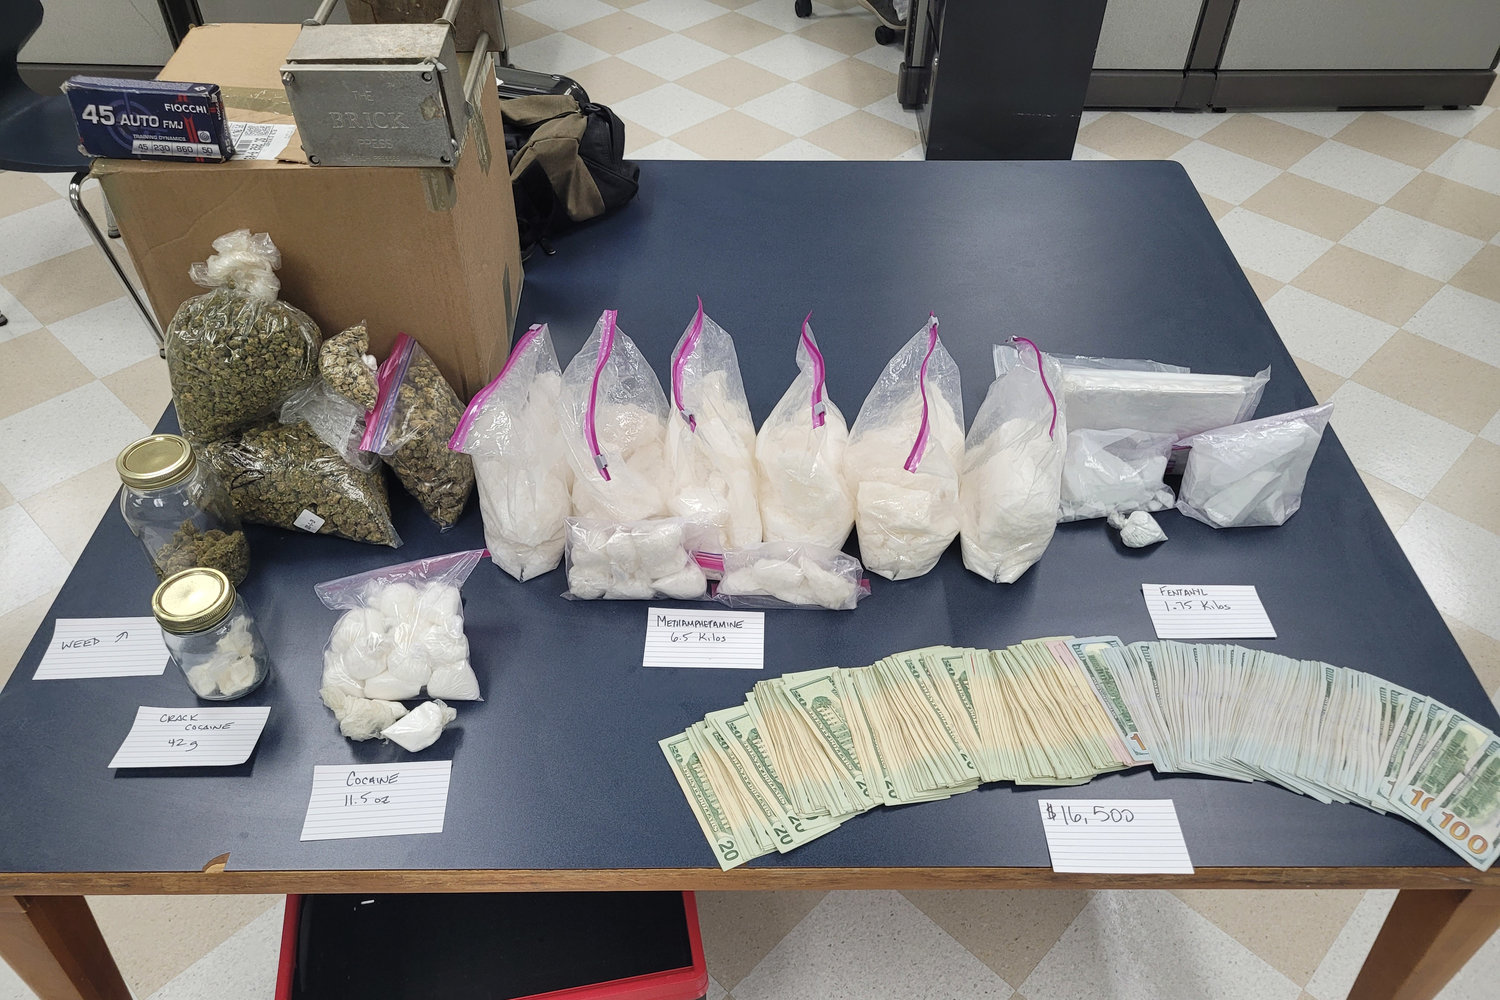 Drugs and cash were seized related to the arrest of Nehemiah Jimmy Mayes.